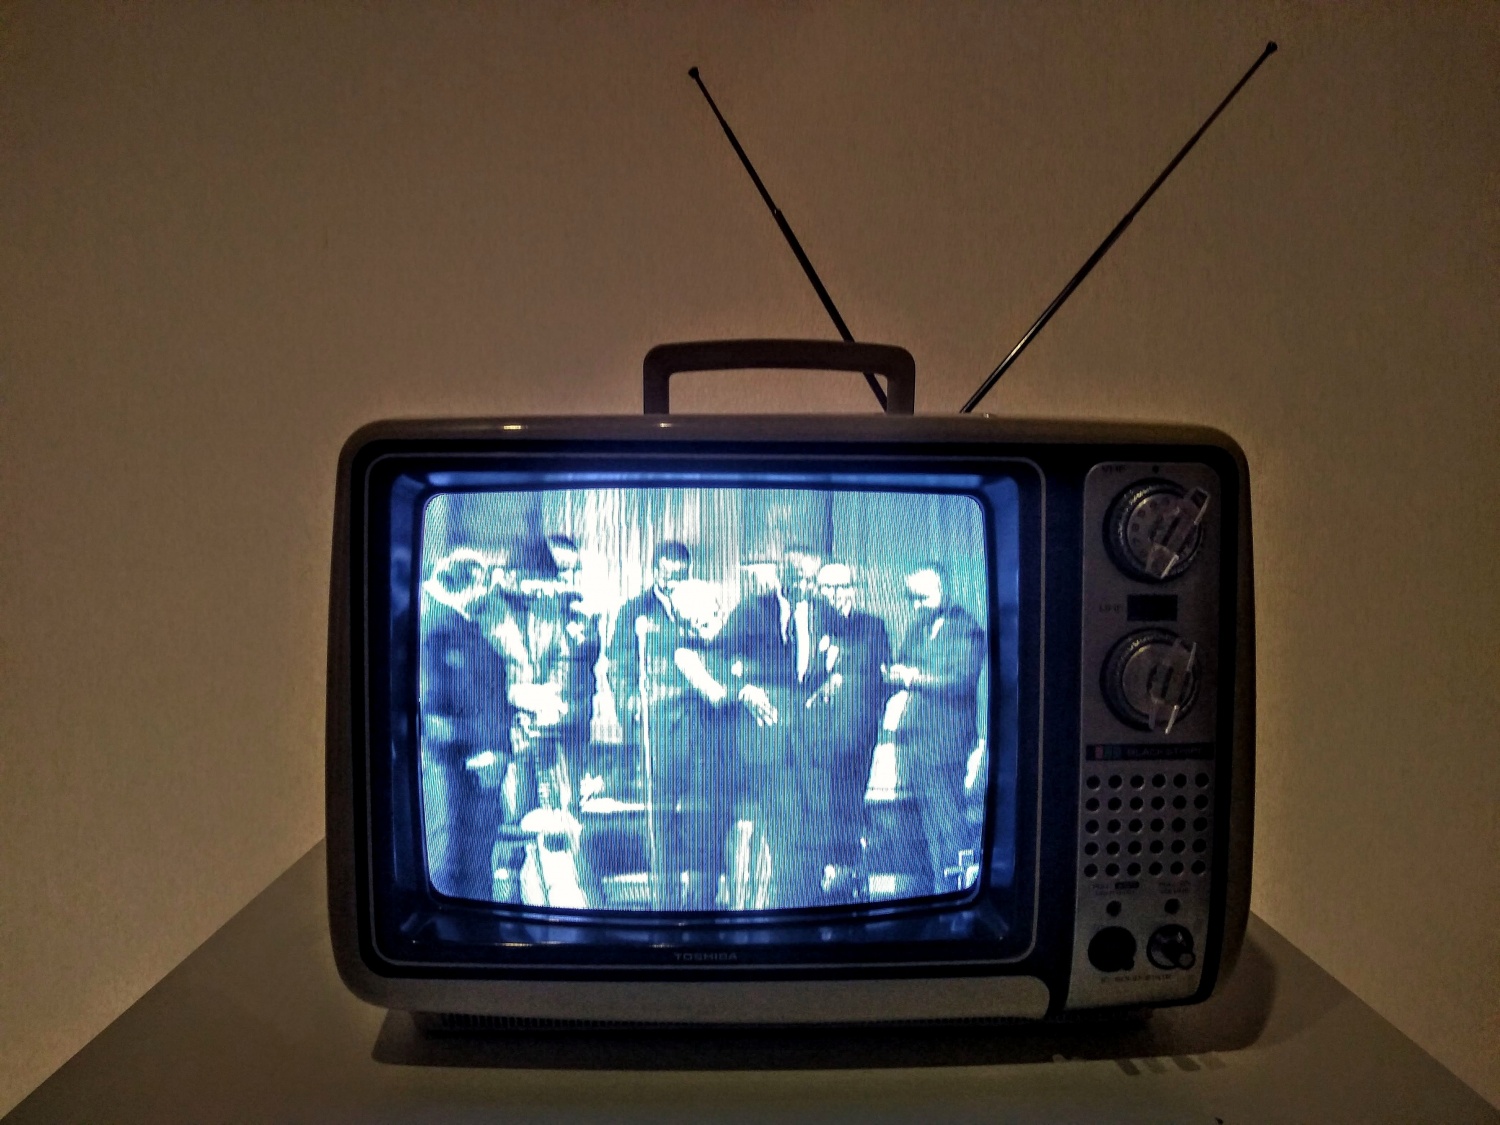 3D Print Your Own Retro Style Working Miniature Television Set